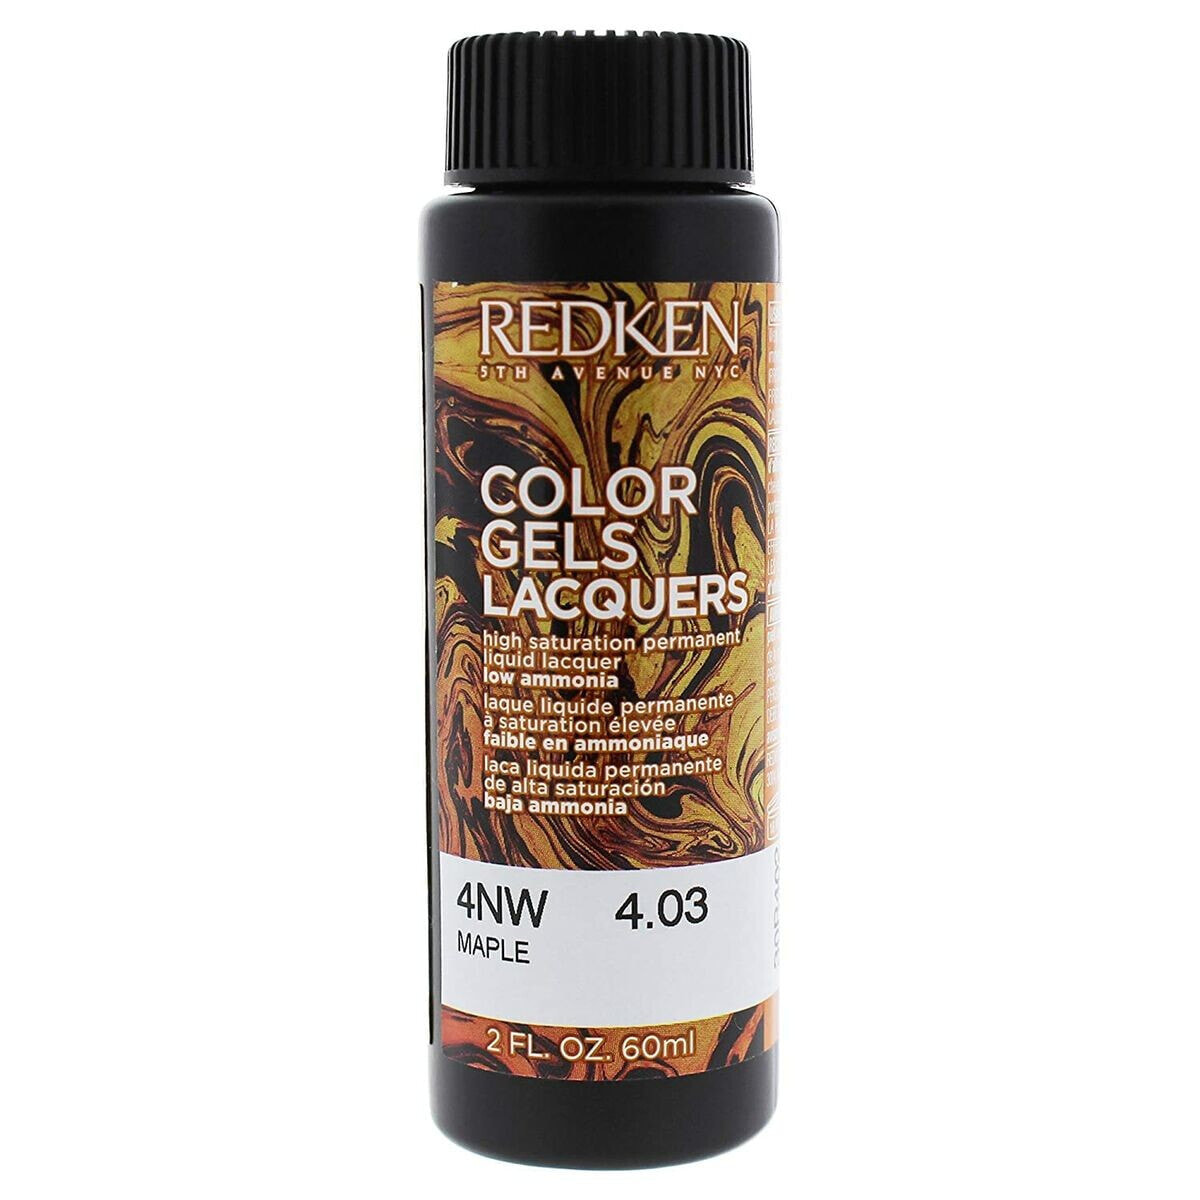 COLOR GEL LACQUERS #4NW-maple 60 ml x 3 u